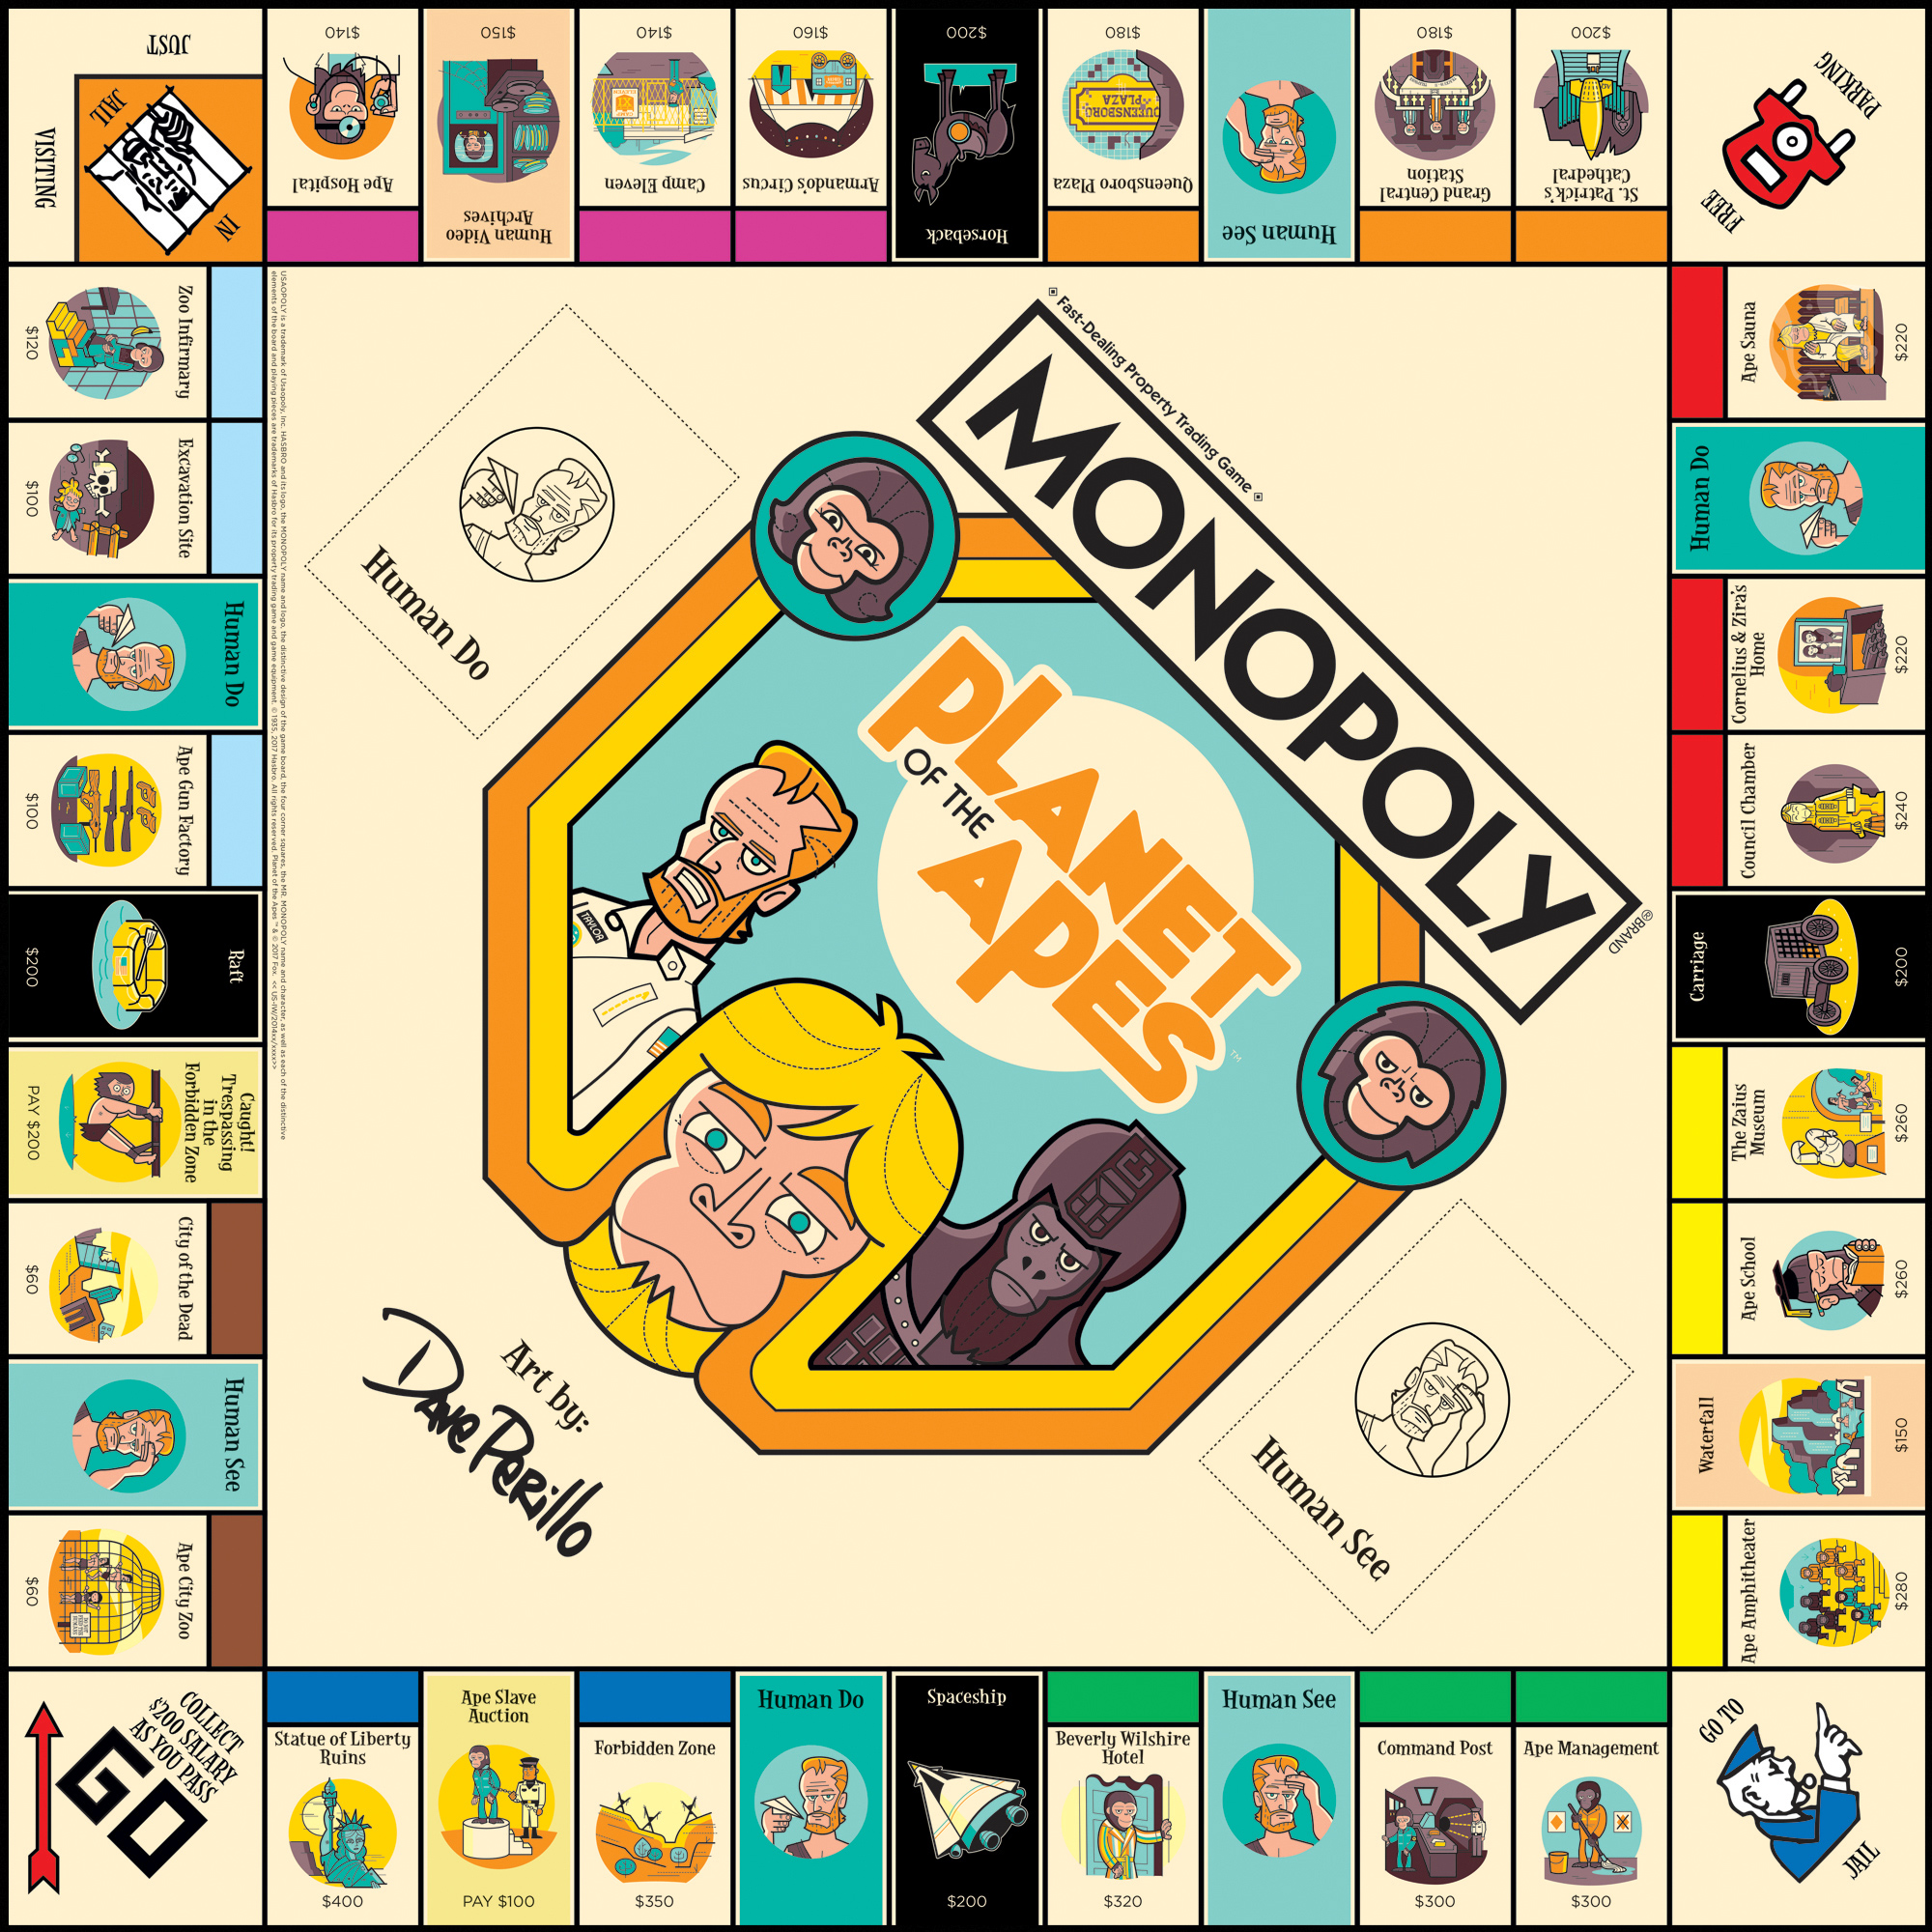 20170807jogo-planet-of-the-apes-1968-monopoly-game-02.jpg